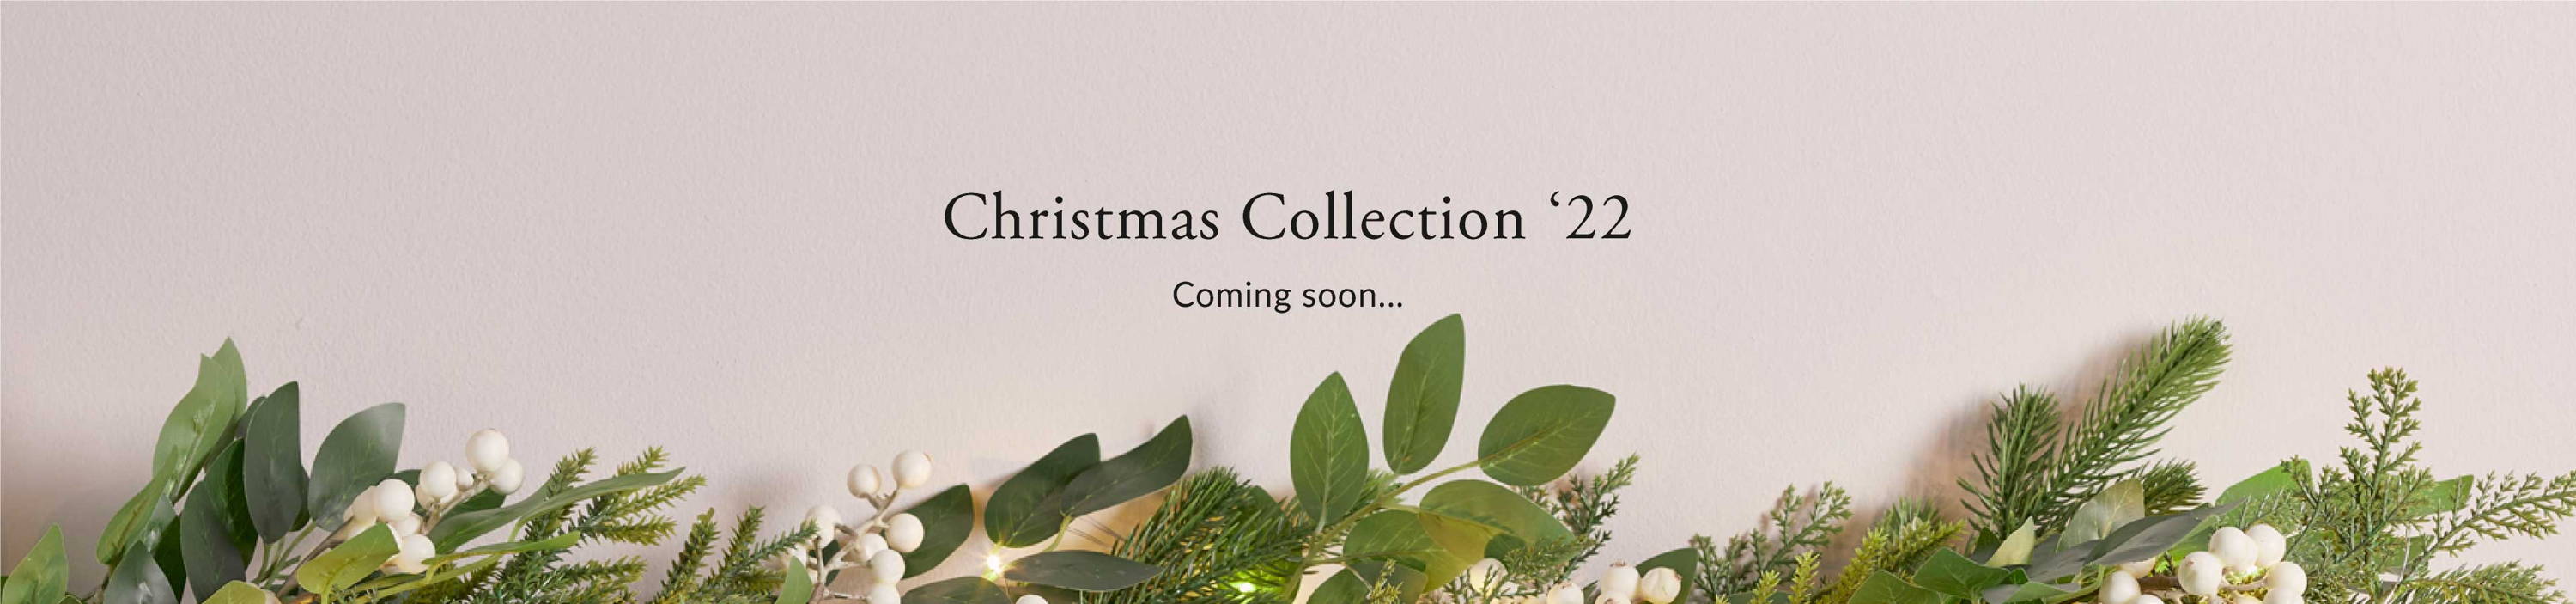 Christmas collection 2022 coming soon banner